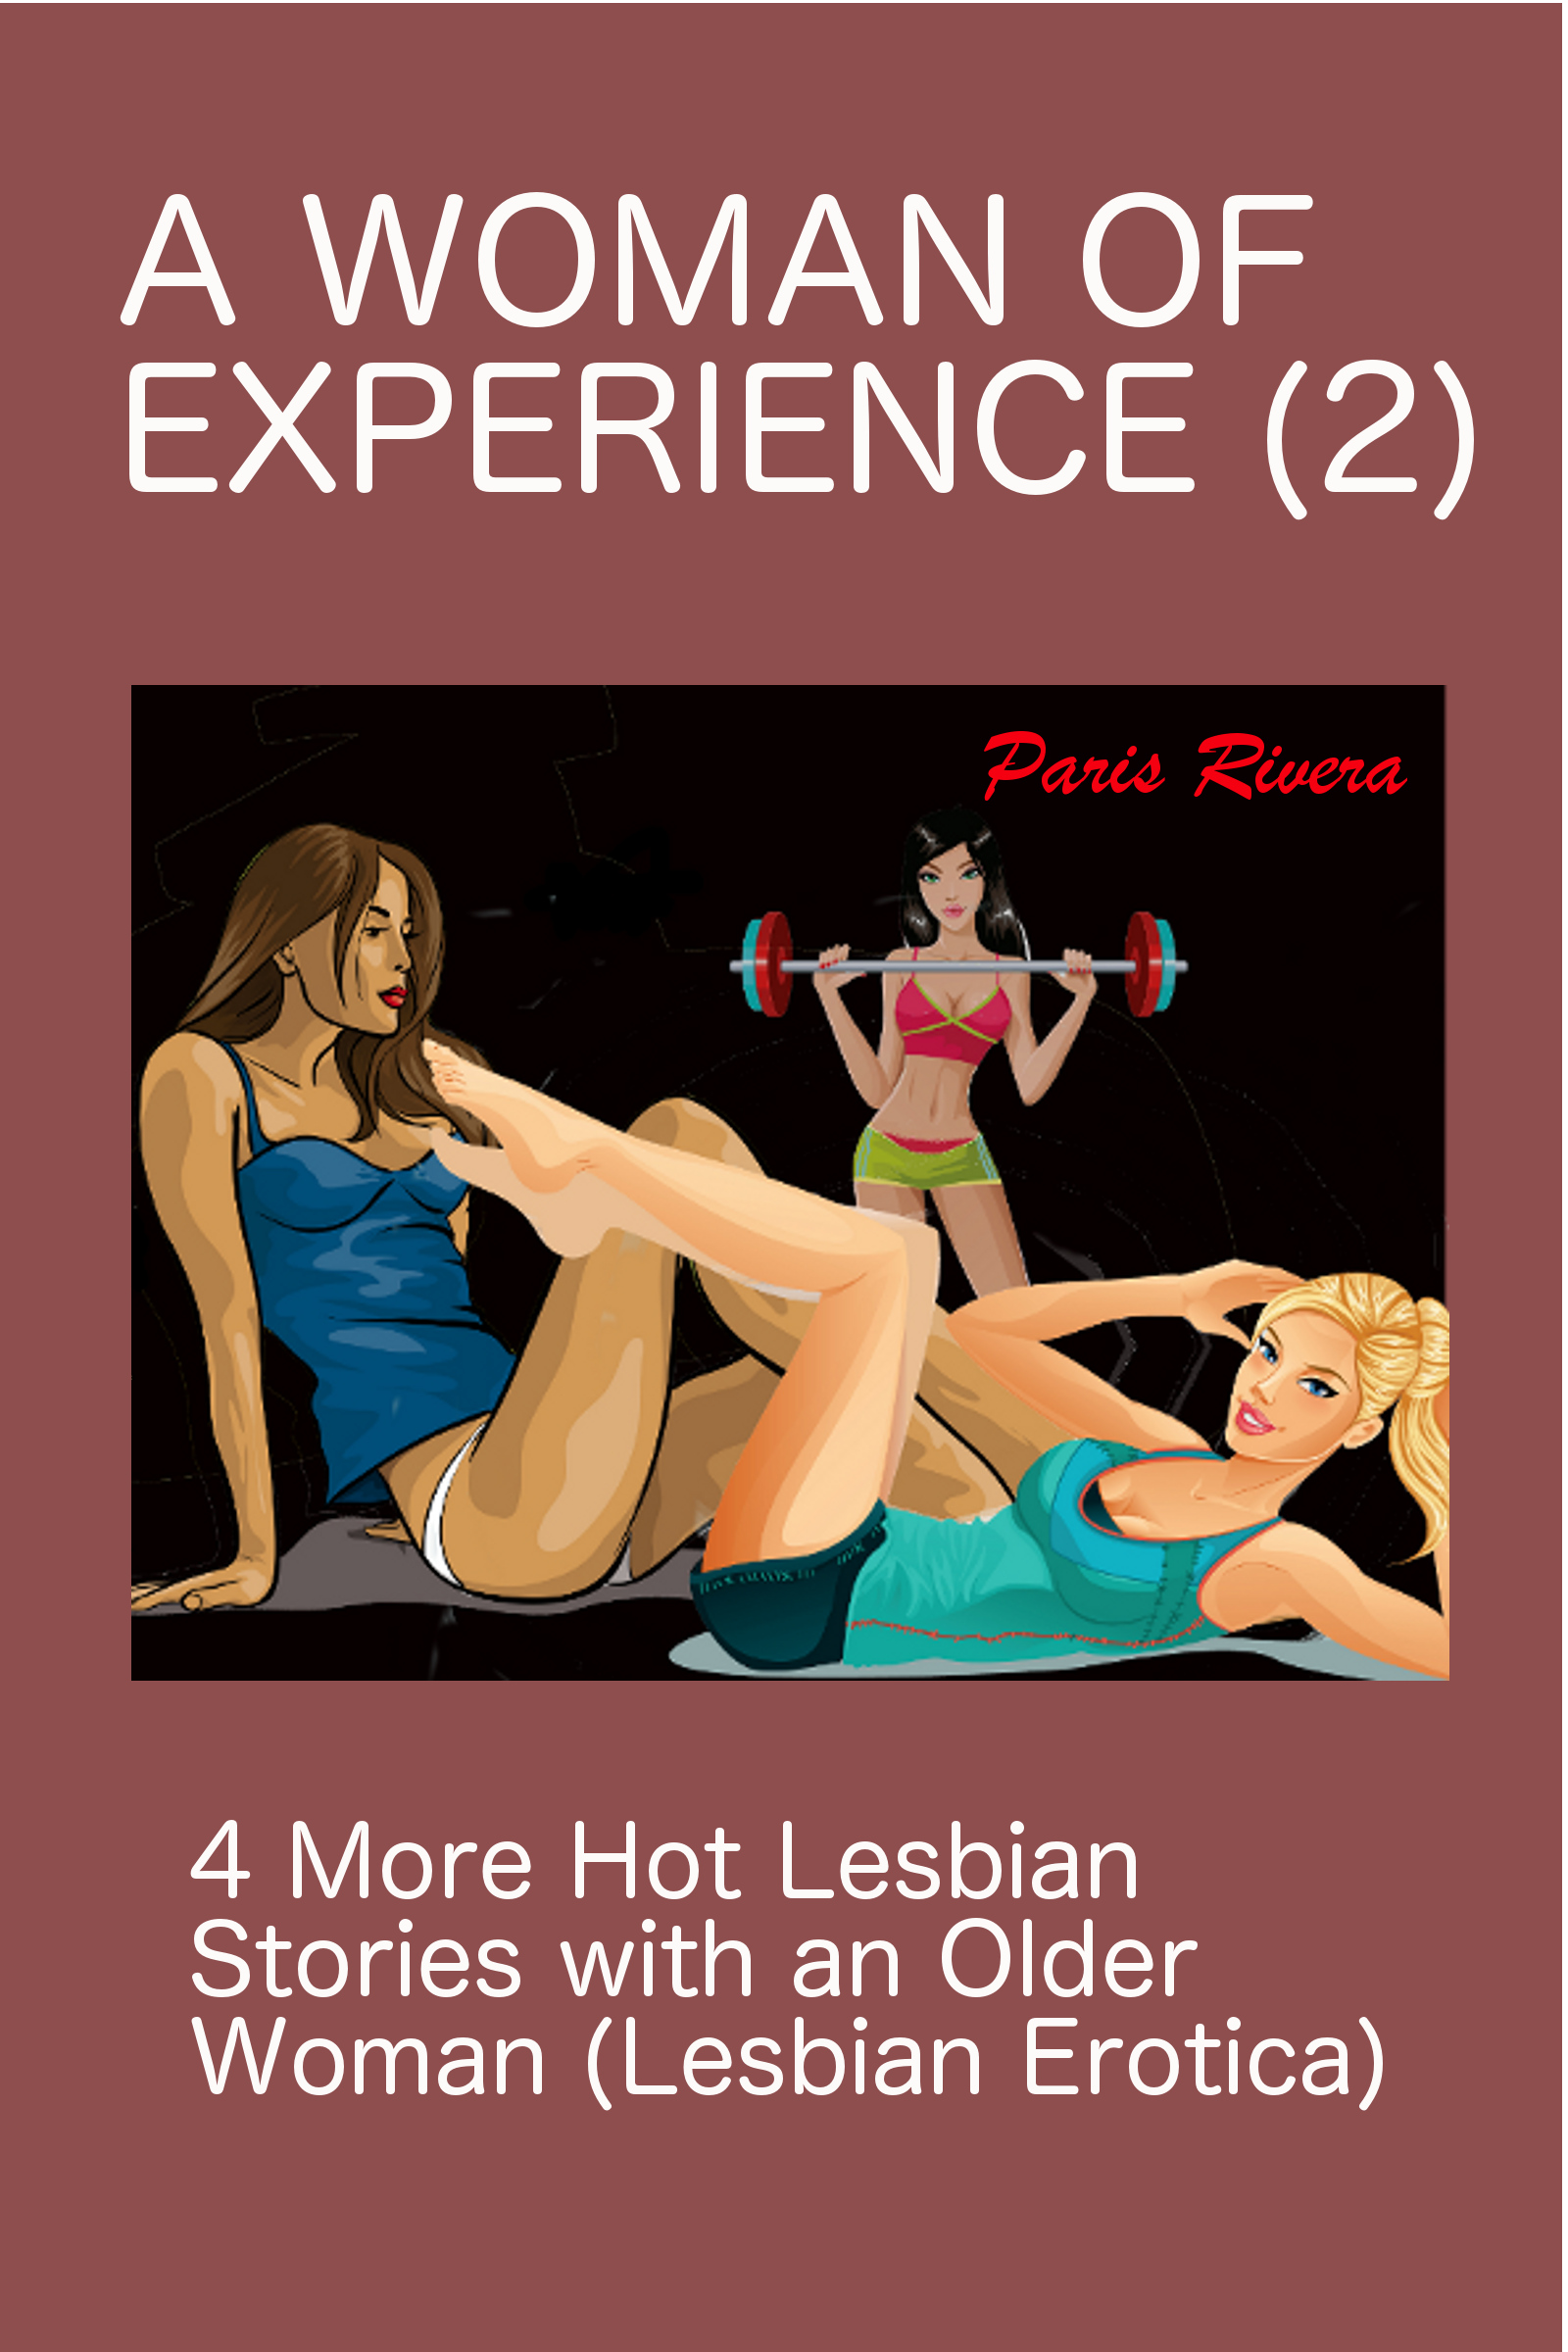 Smashwords â€“ A Woman of Experience (2): 4 More Hot Lesbian Stories with an Older  Woman (Lesbian Erotica) â€“ a book by Paris Rivera